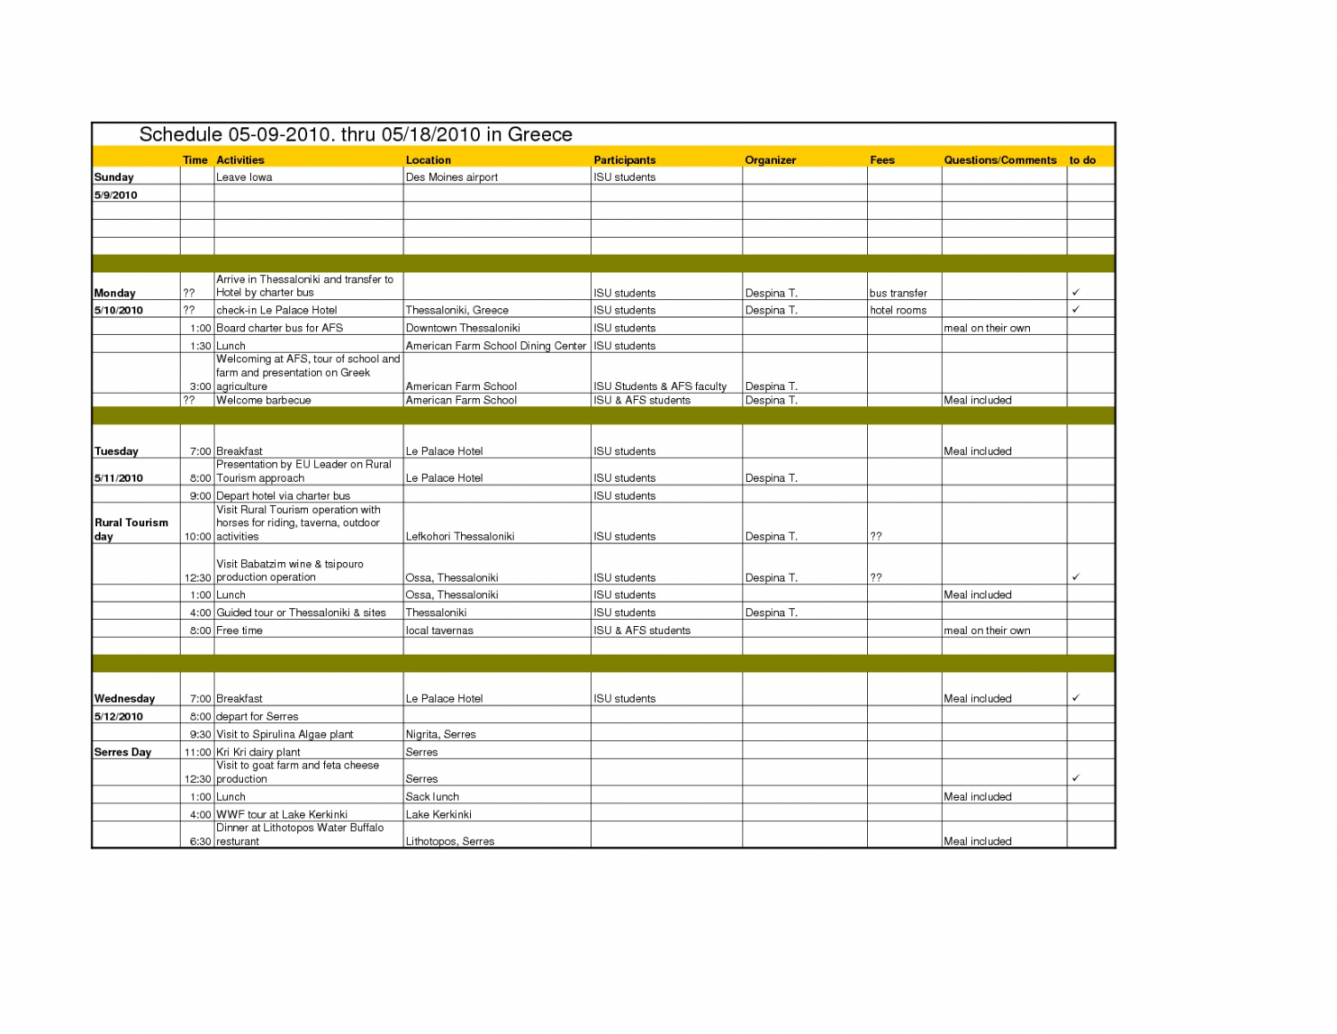 Sample Business Travel Itinerary Template